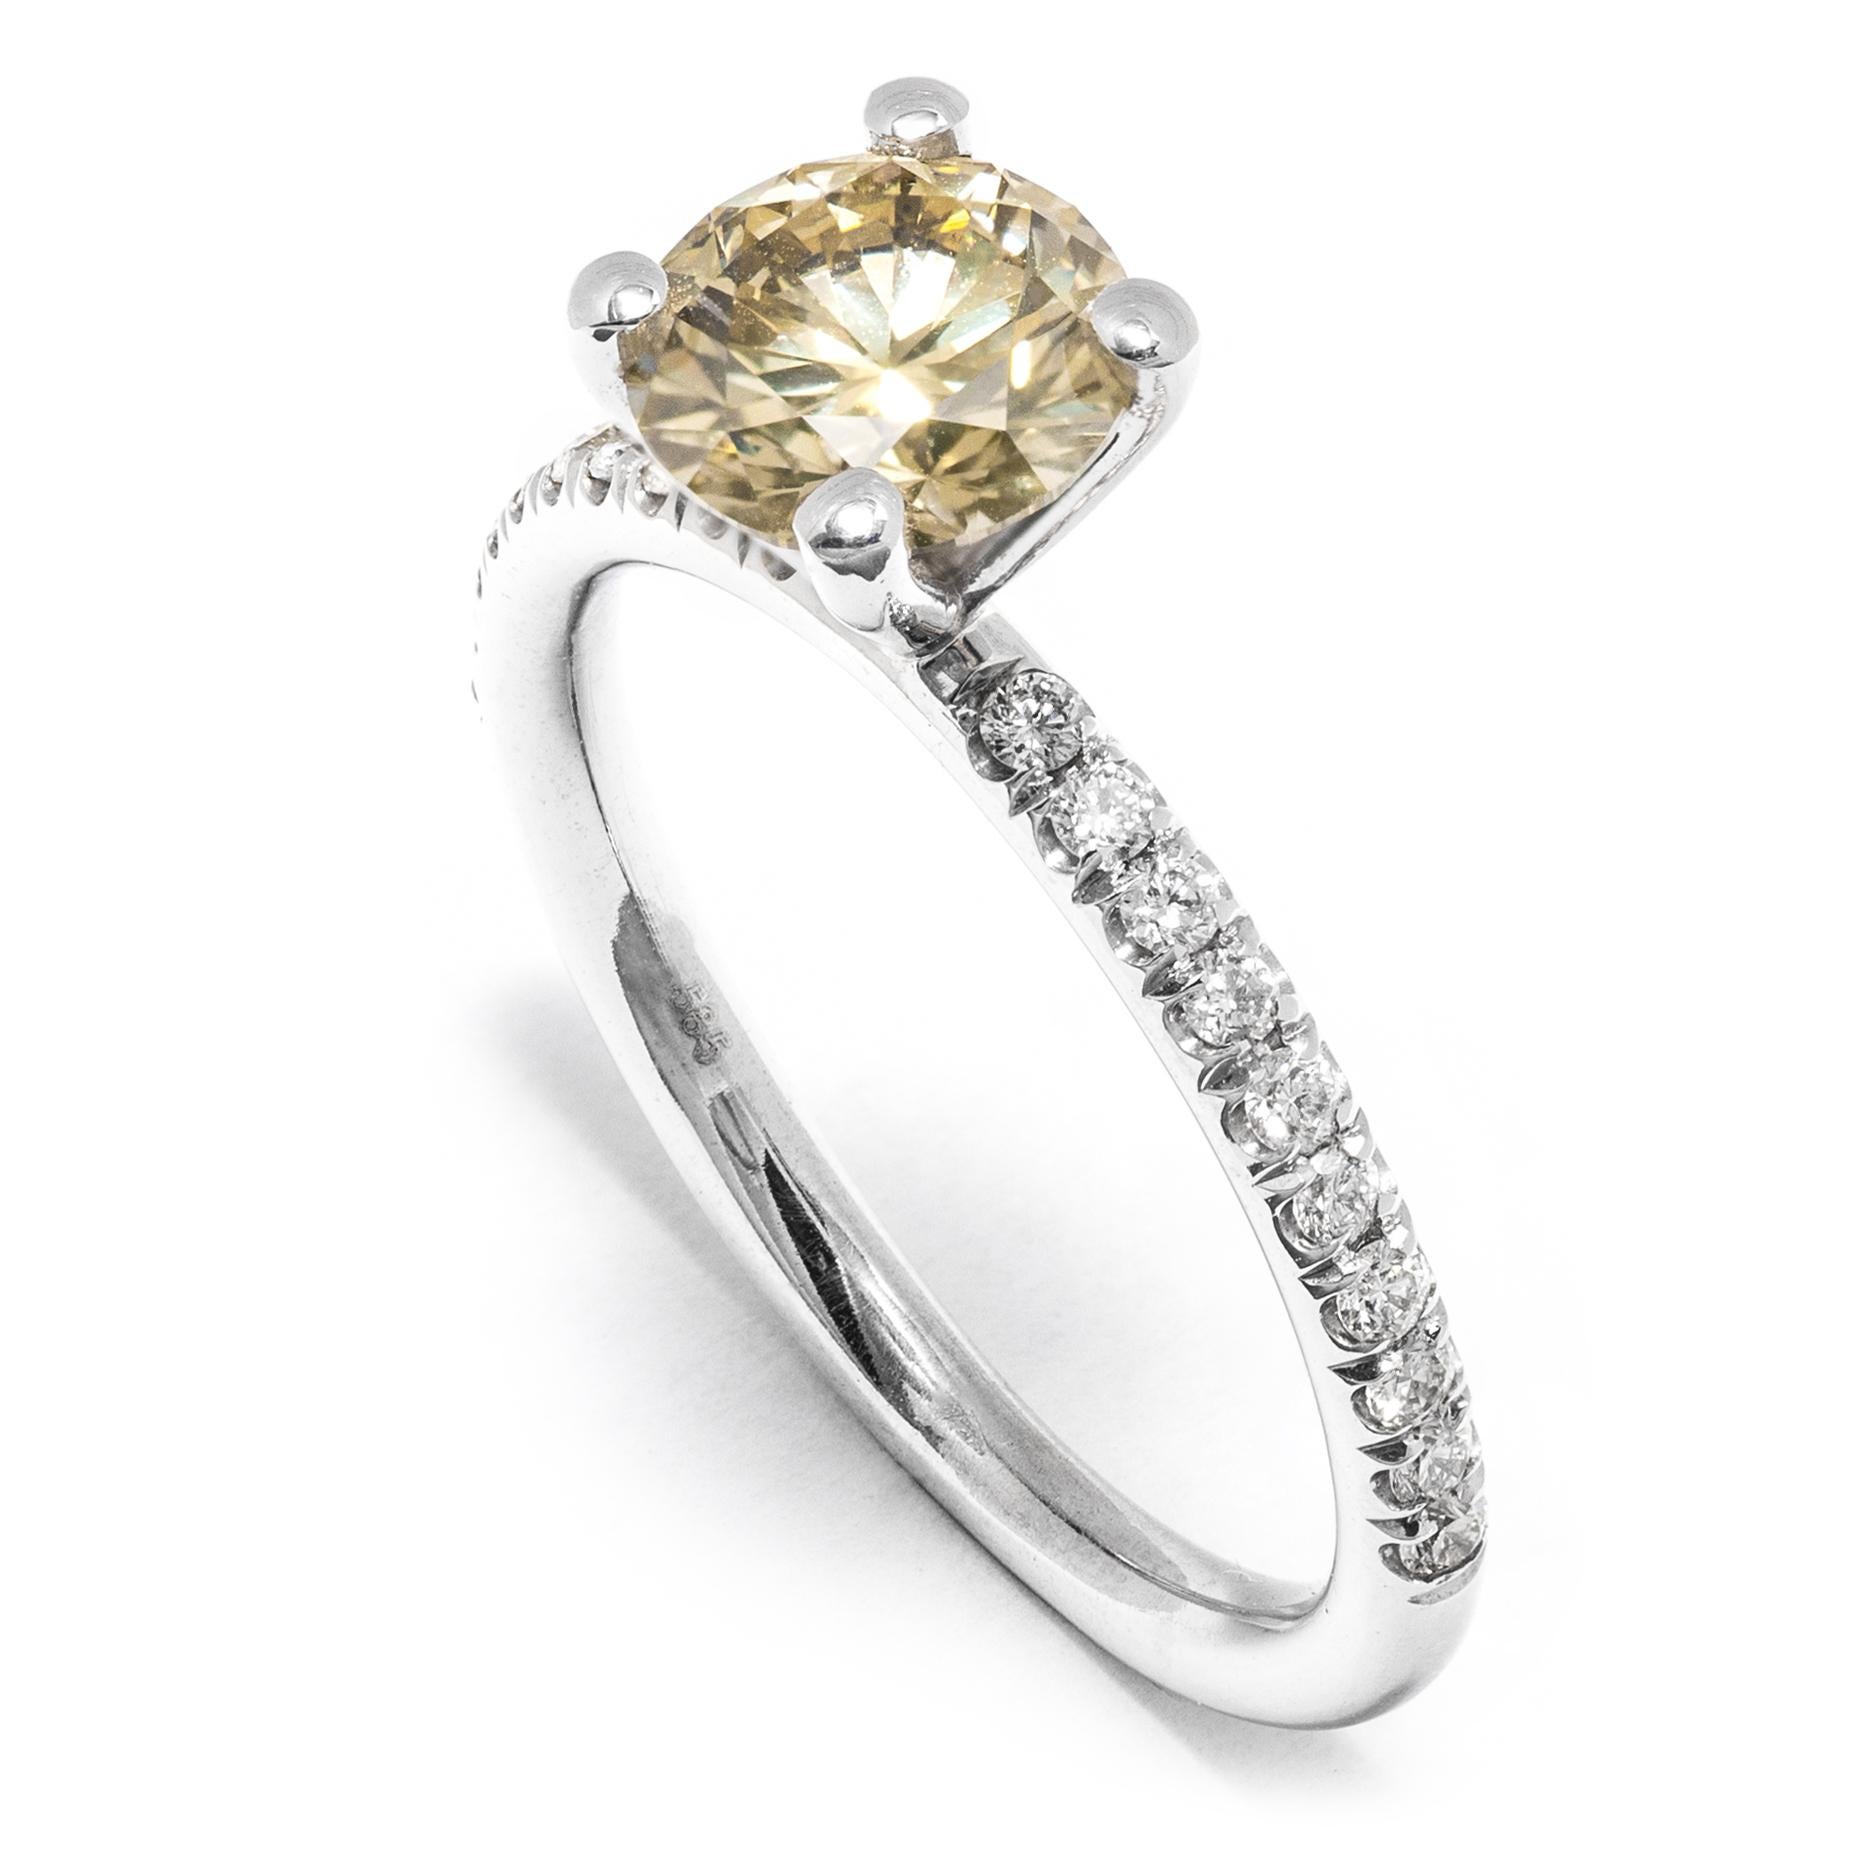 This item is offered without any reserve price, starting bid $1, highest bid wins.
Modern and elegant ring set with 1.31 ct Natural Brownish Yellow Round Brilliant Diamond at the center of a 14k White Gold frame accented by a pave of 0.24 ct (20)